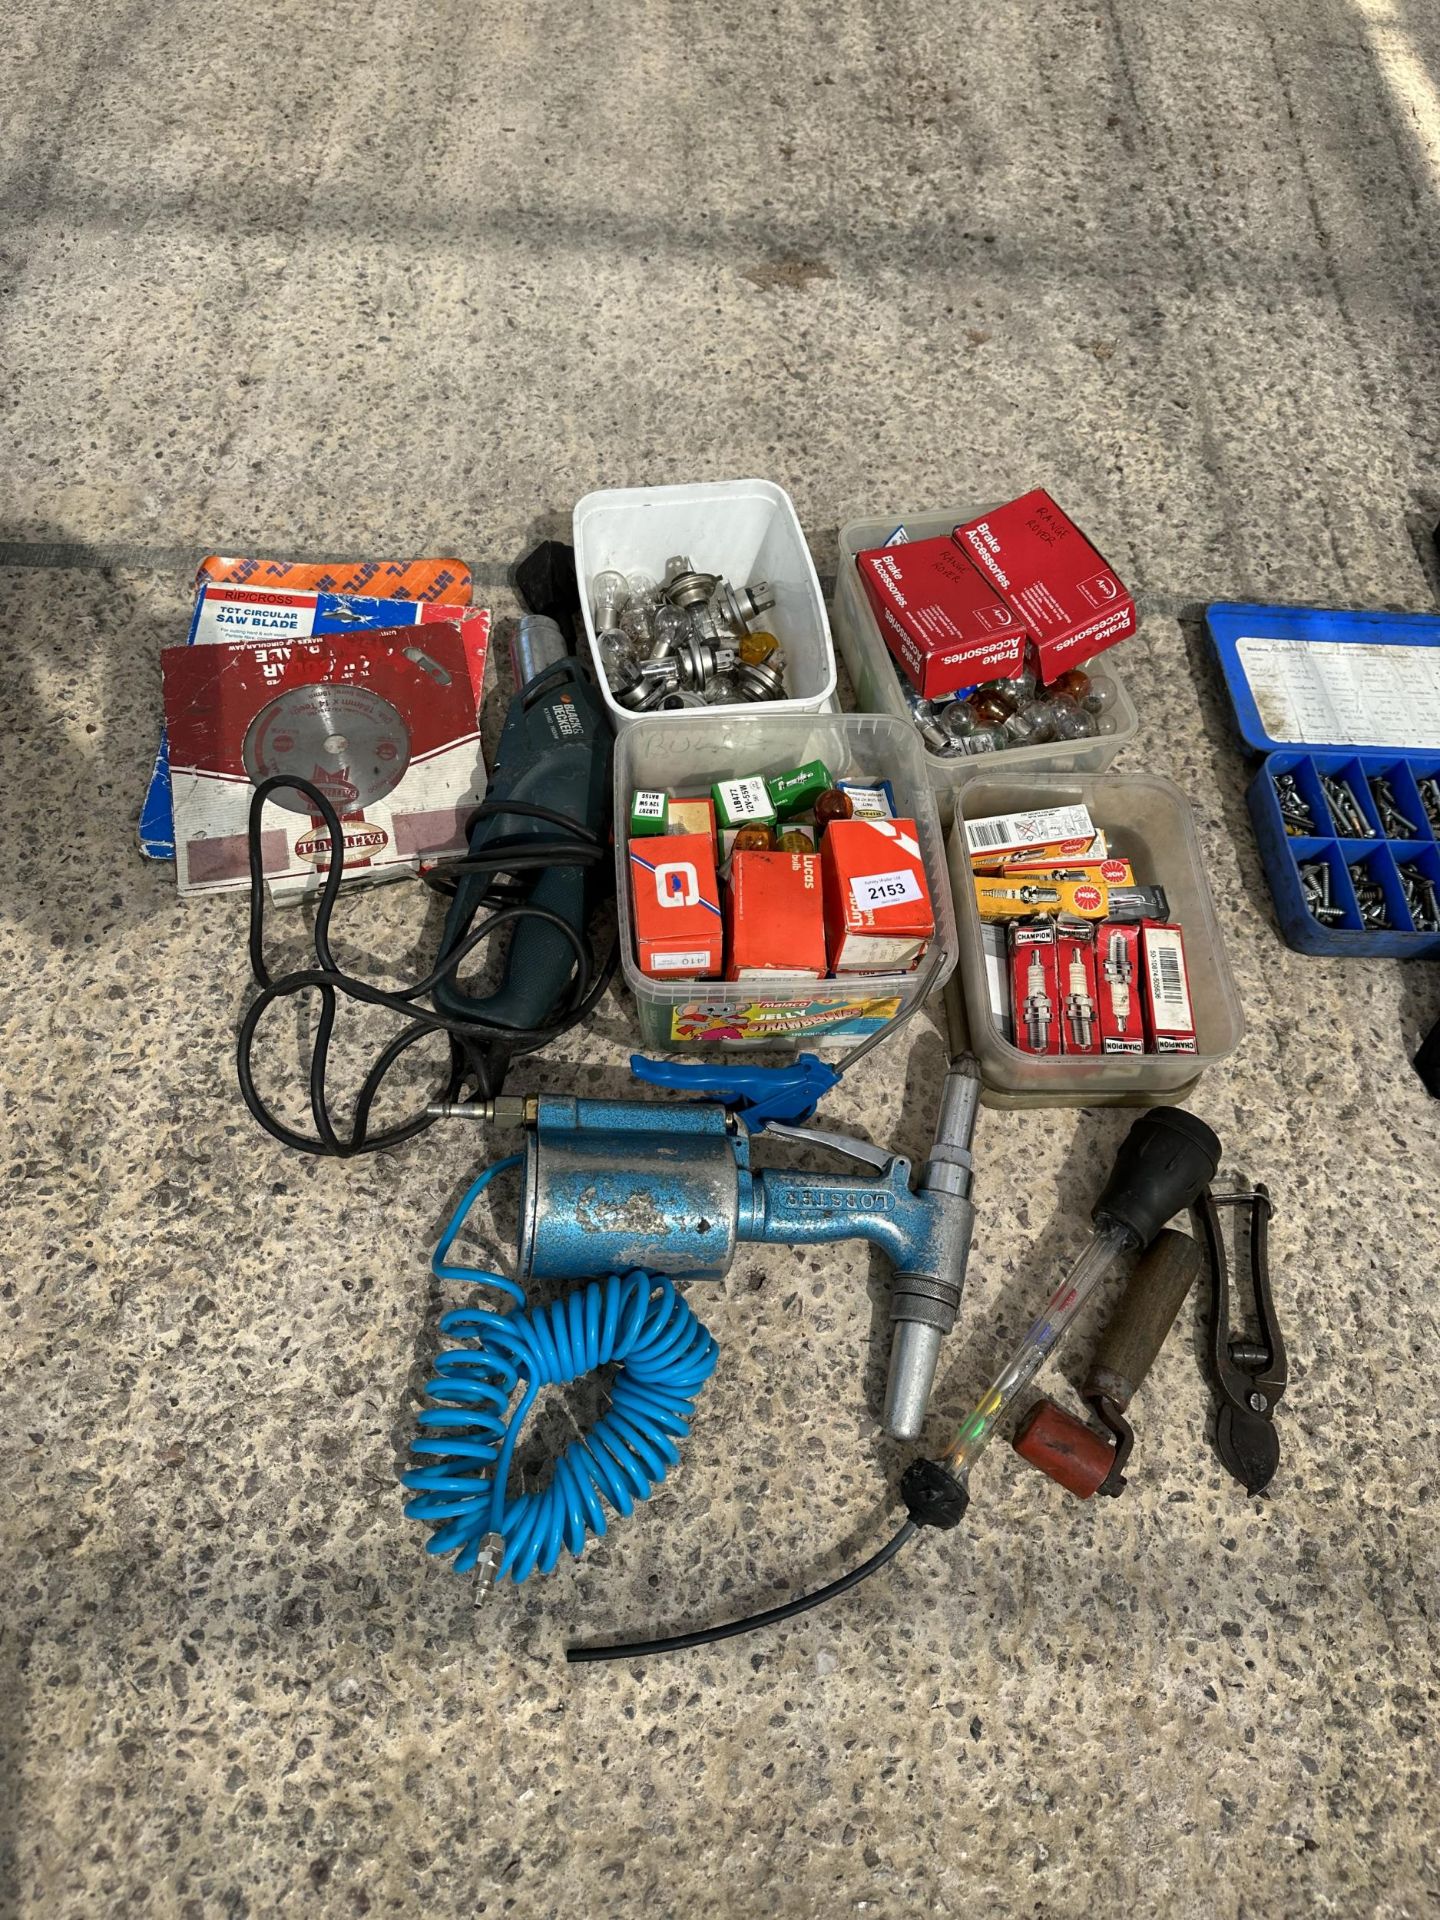 AN ASSORTMENT OF TOOLS TO INCLUDE VEHICLE LIGHT BULBS, A HEAT GUN AND A COMPRESSOR ATTATCHMENT ETC